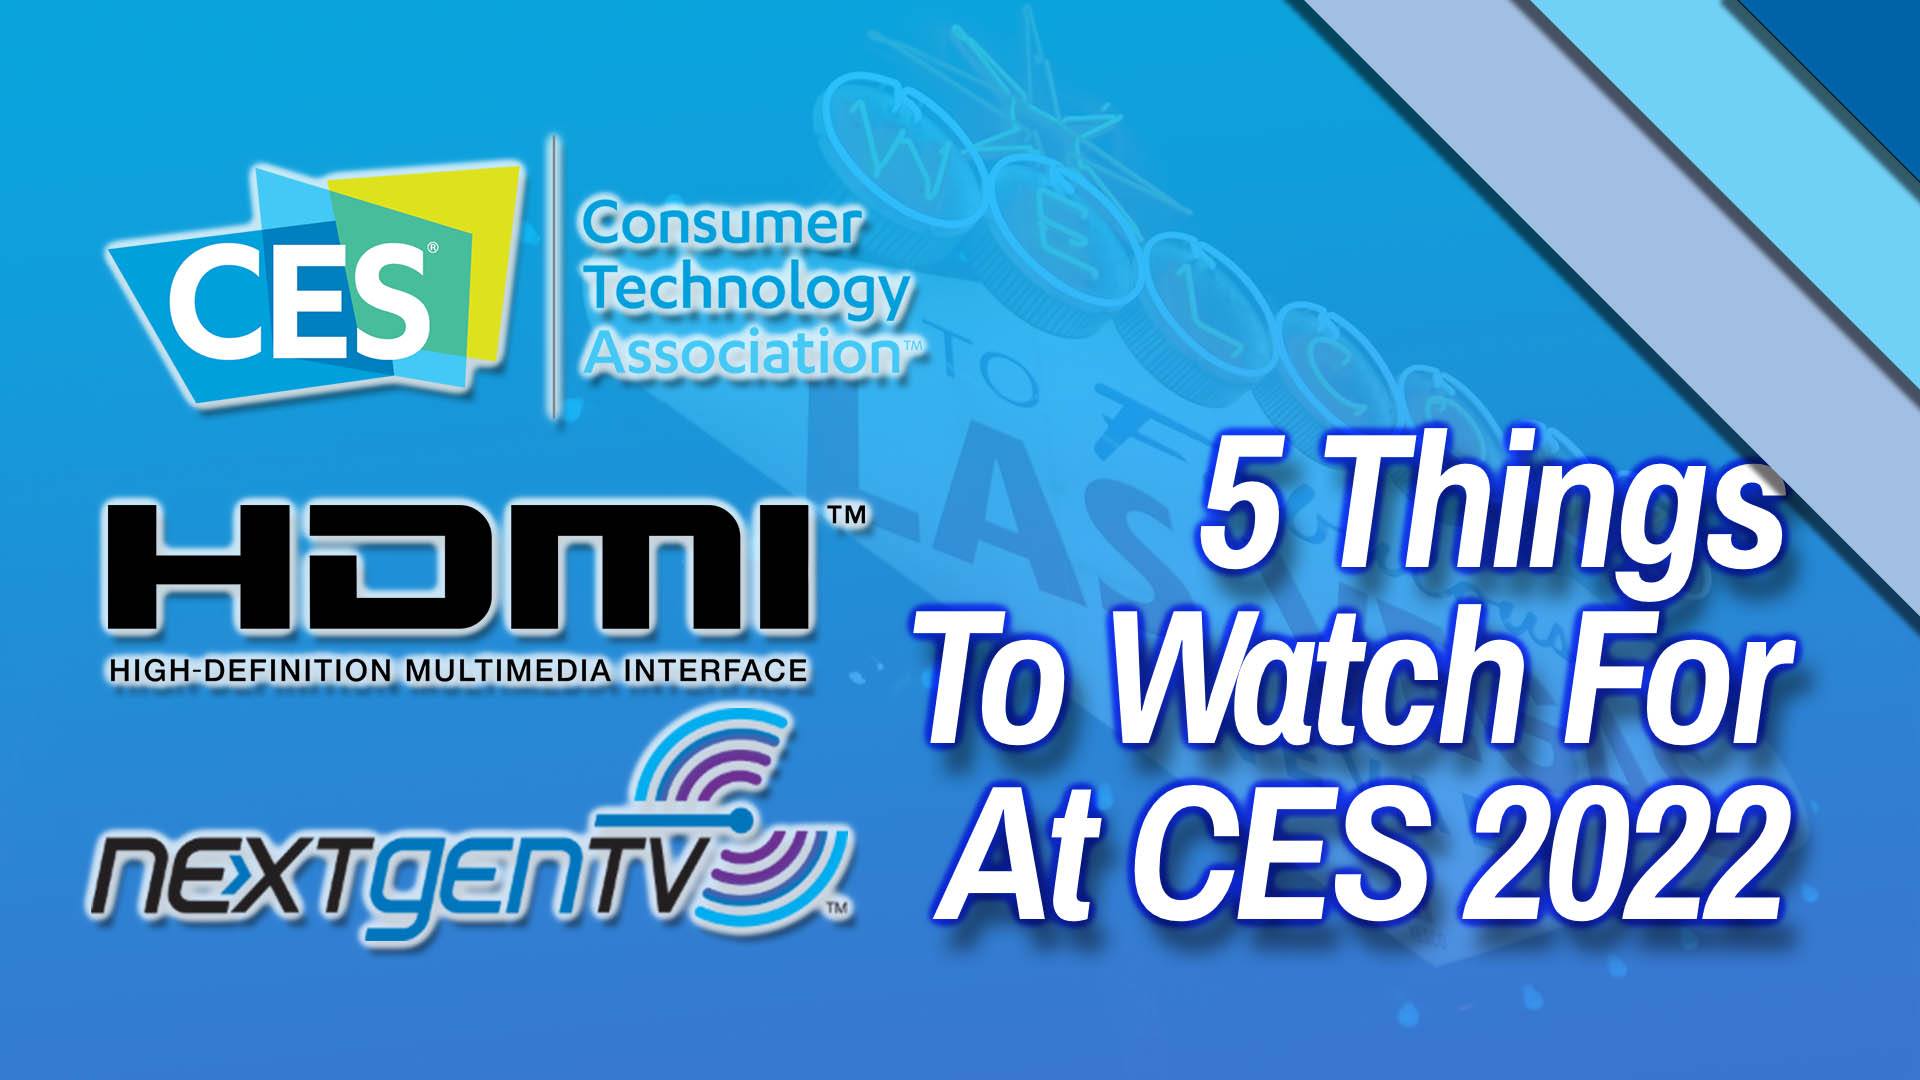 Video: What to Expect at CES 2022